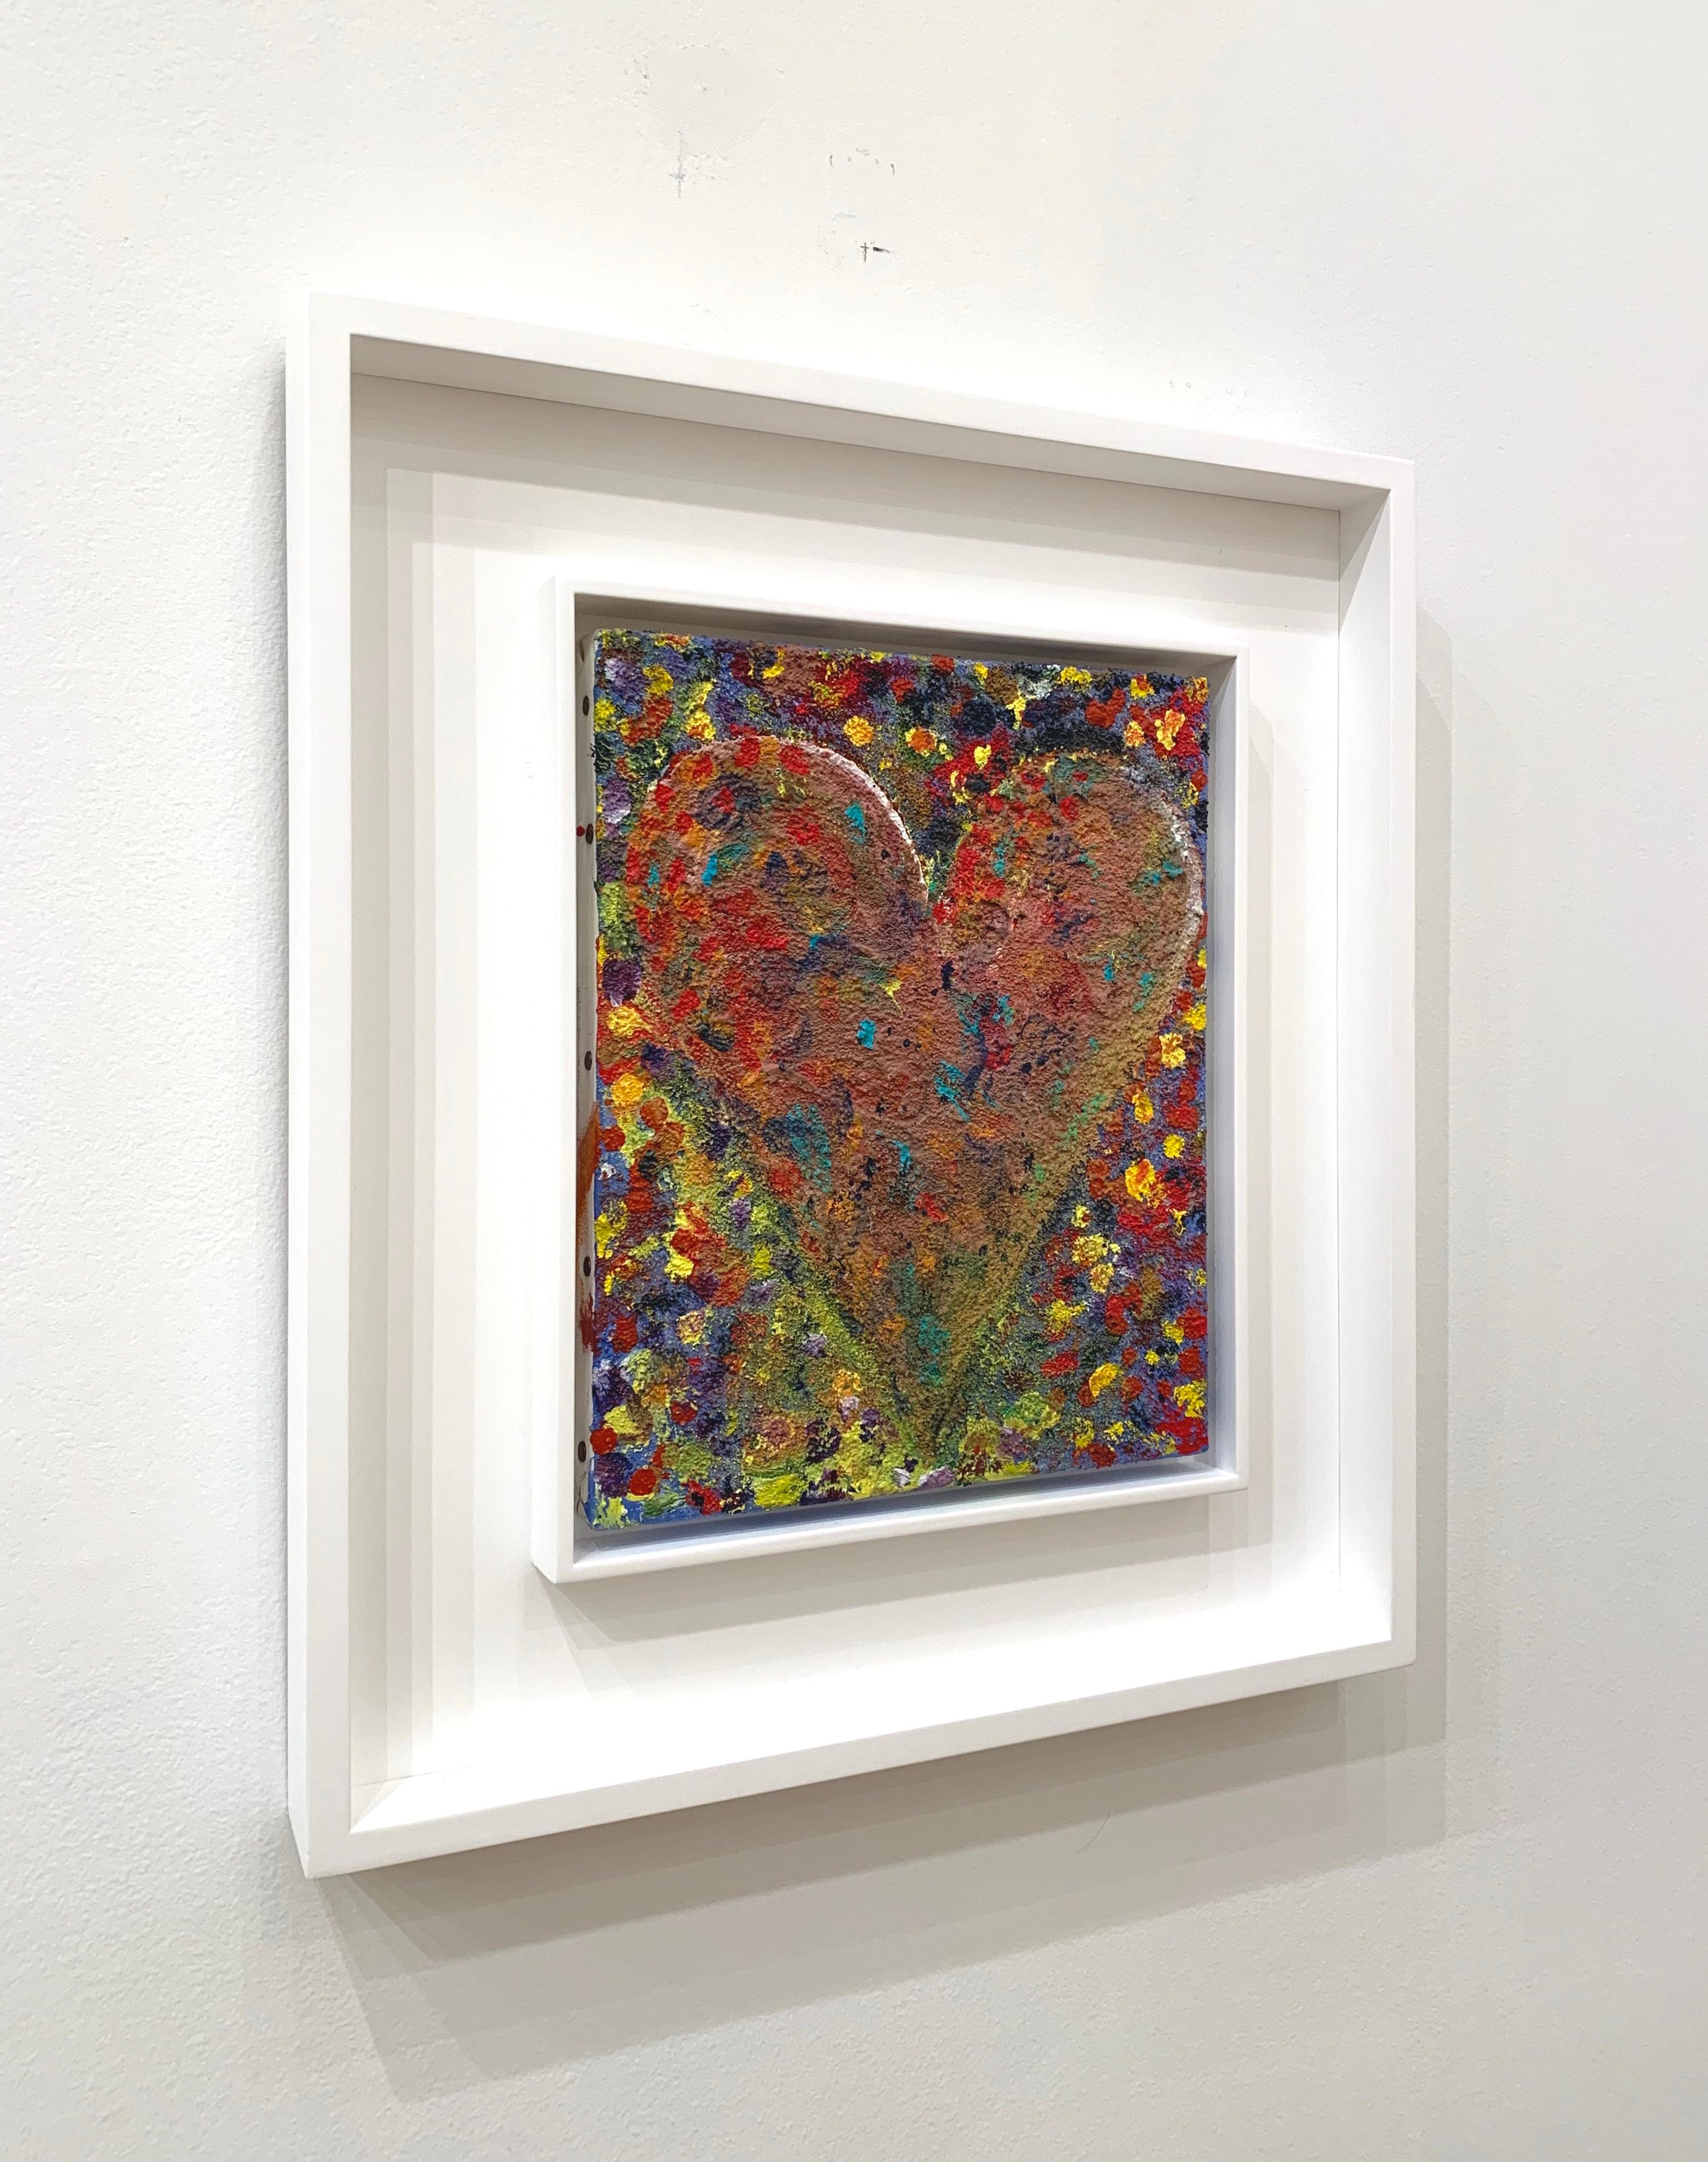 Heart in the Sand - Pop Art Painting by Jim Dine